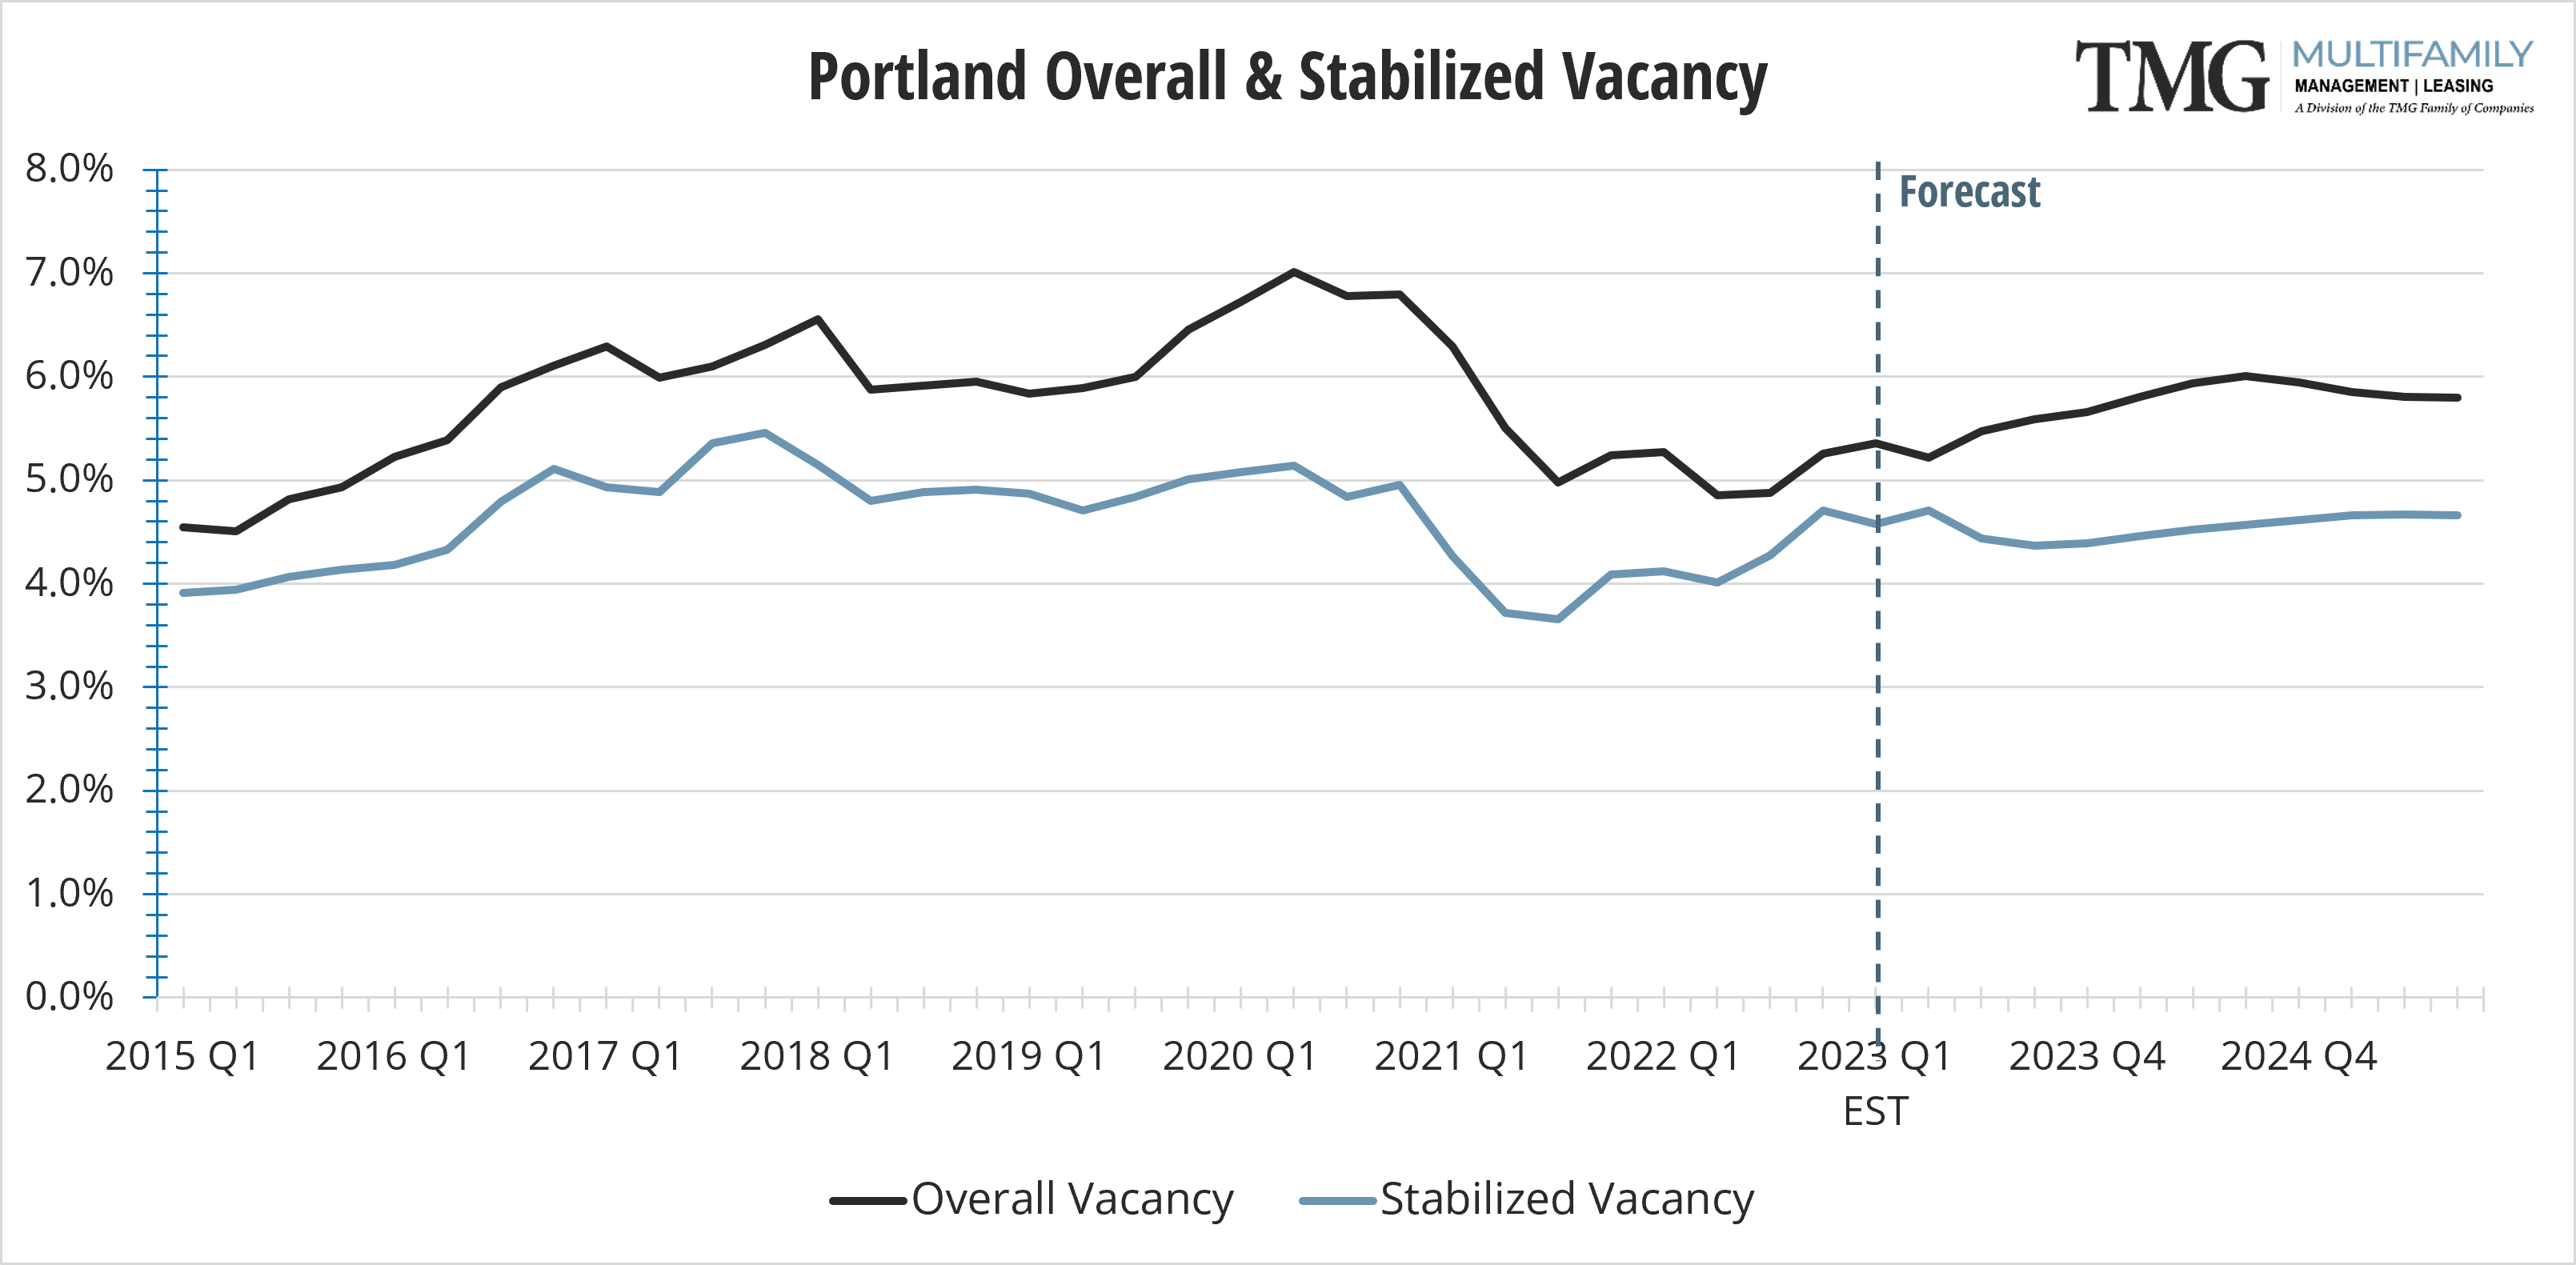 PDX Overall & Stabilized Vacancy